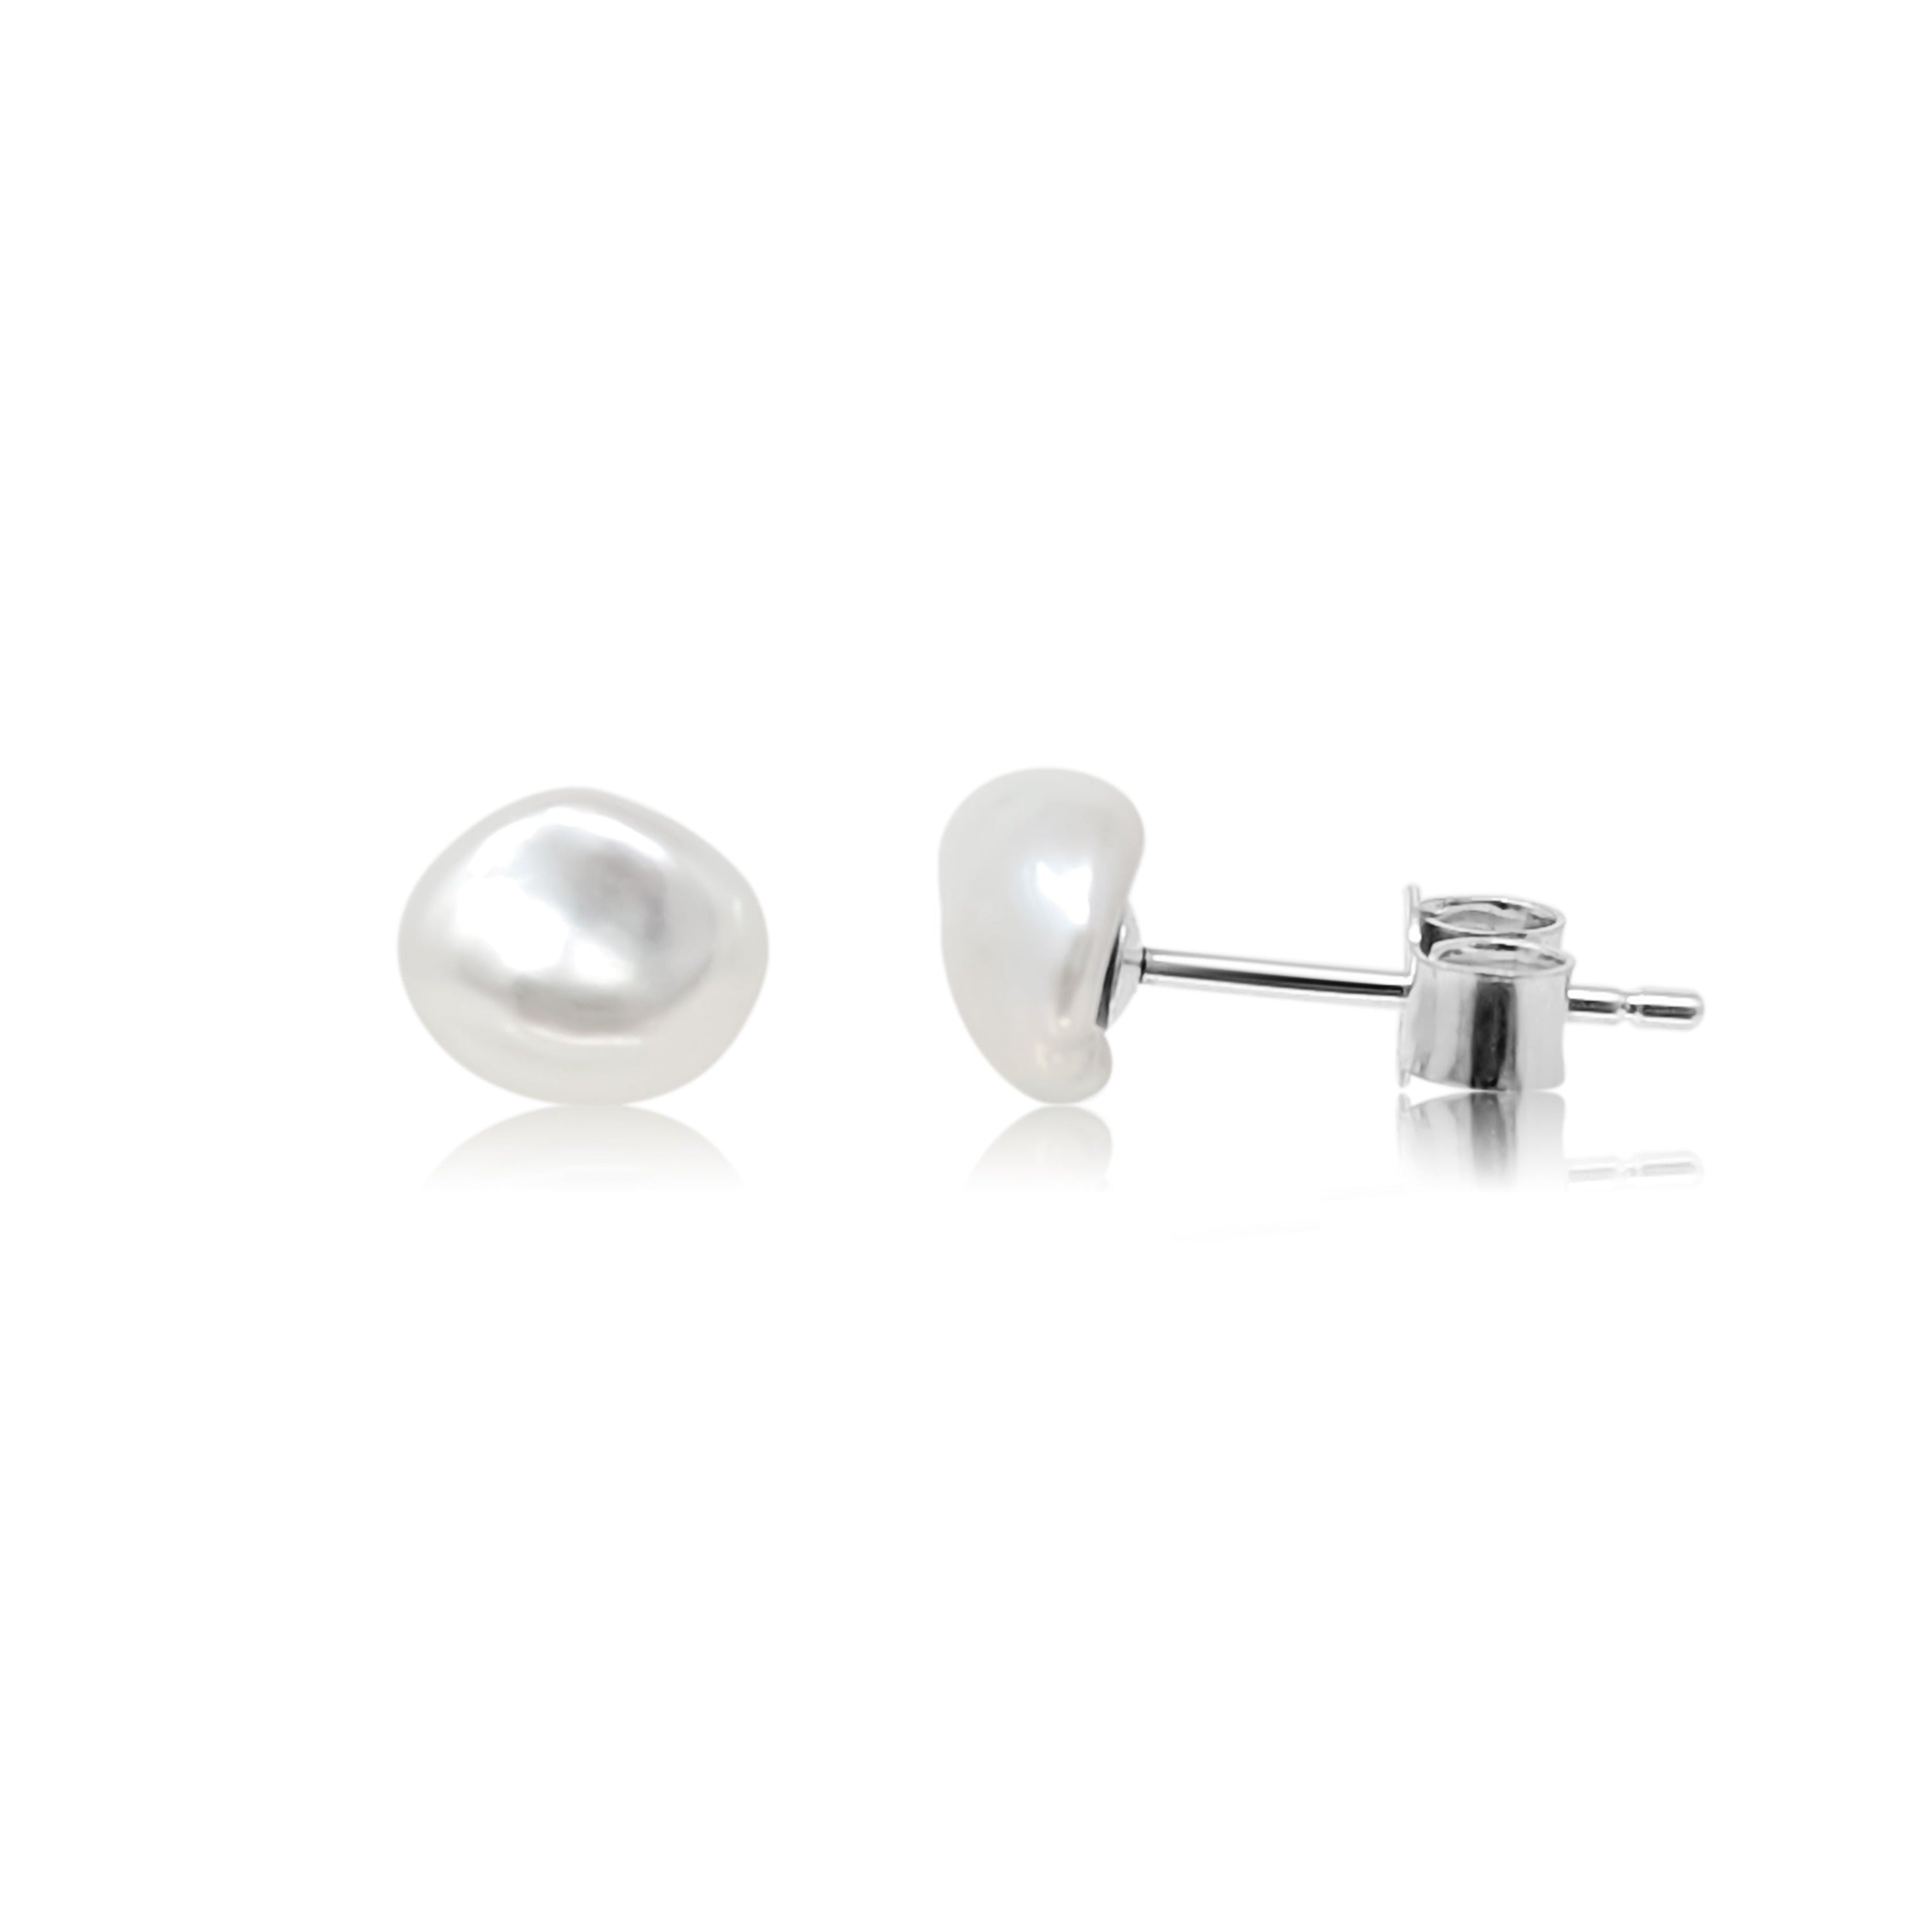 Sterling silver small keshi pearl studs on white background